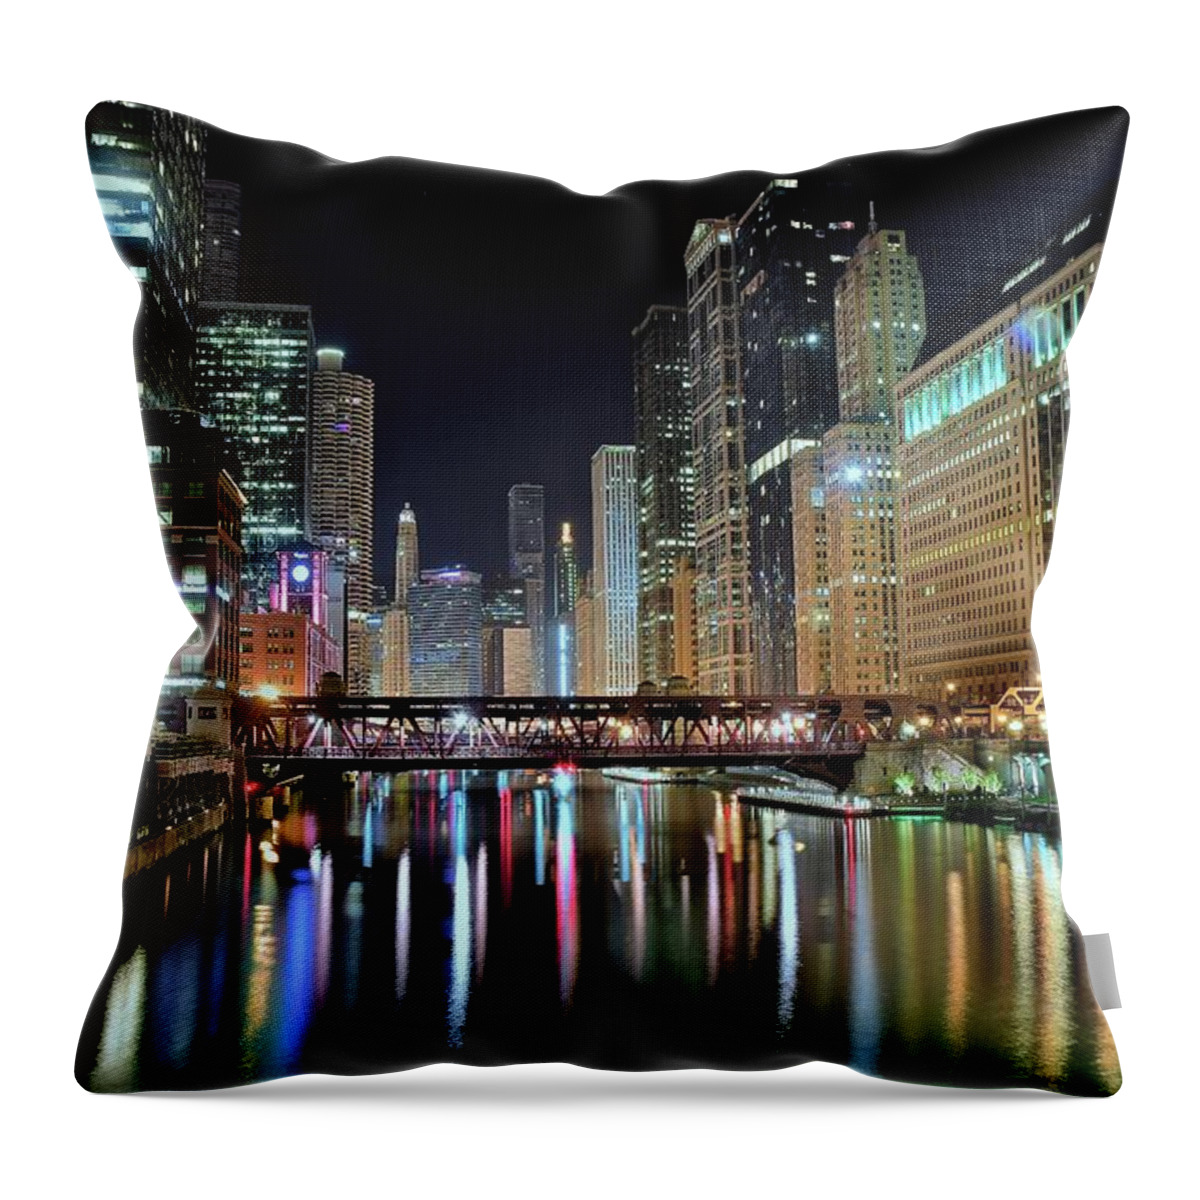 Chicago Throw Pillow featuring the photograph Chicago Lights Shimmer by Frozen in Time Fine Art Photography